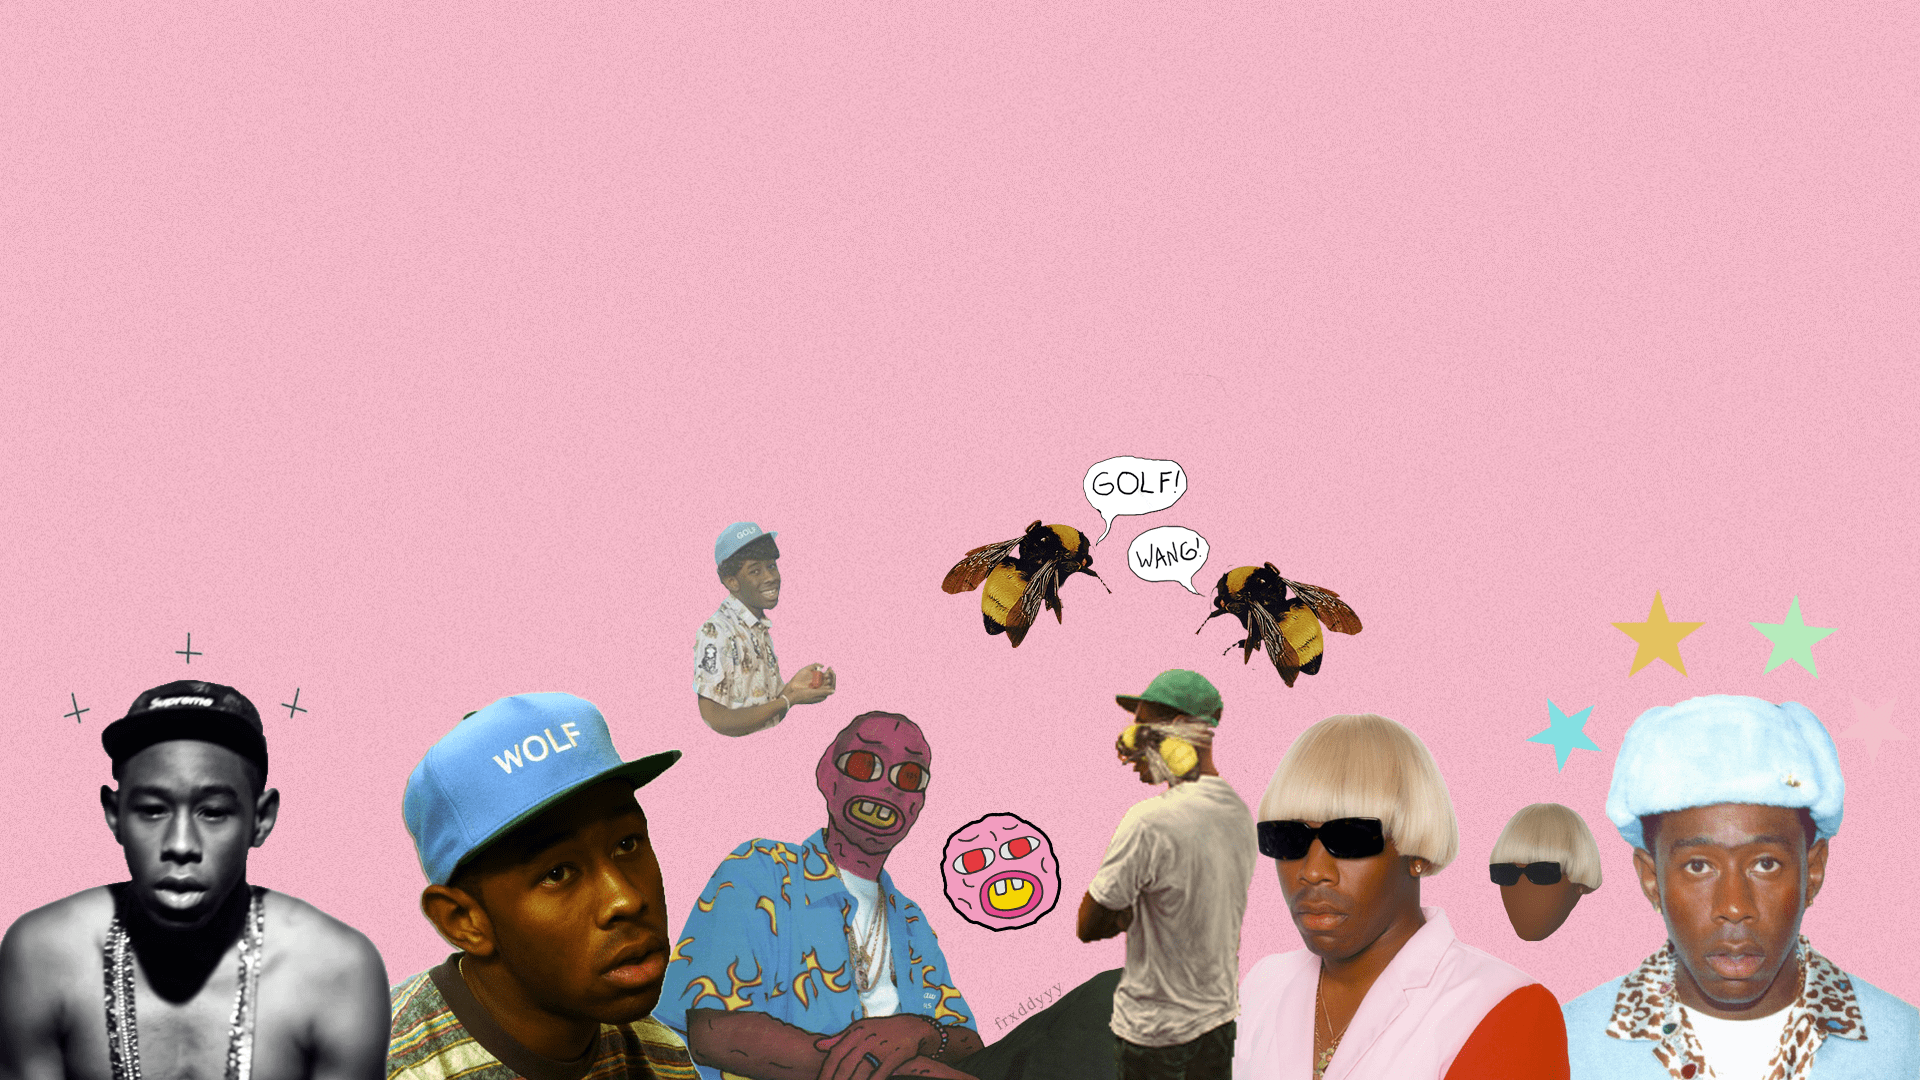 tyler, the creator desktop background / wallpaper (1920x1080) (made by me)